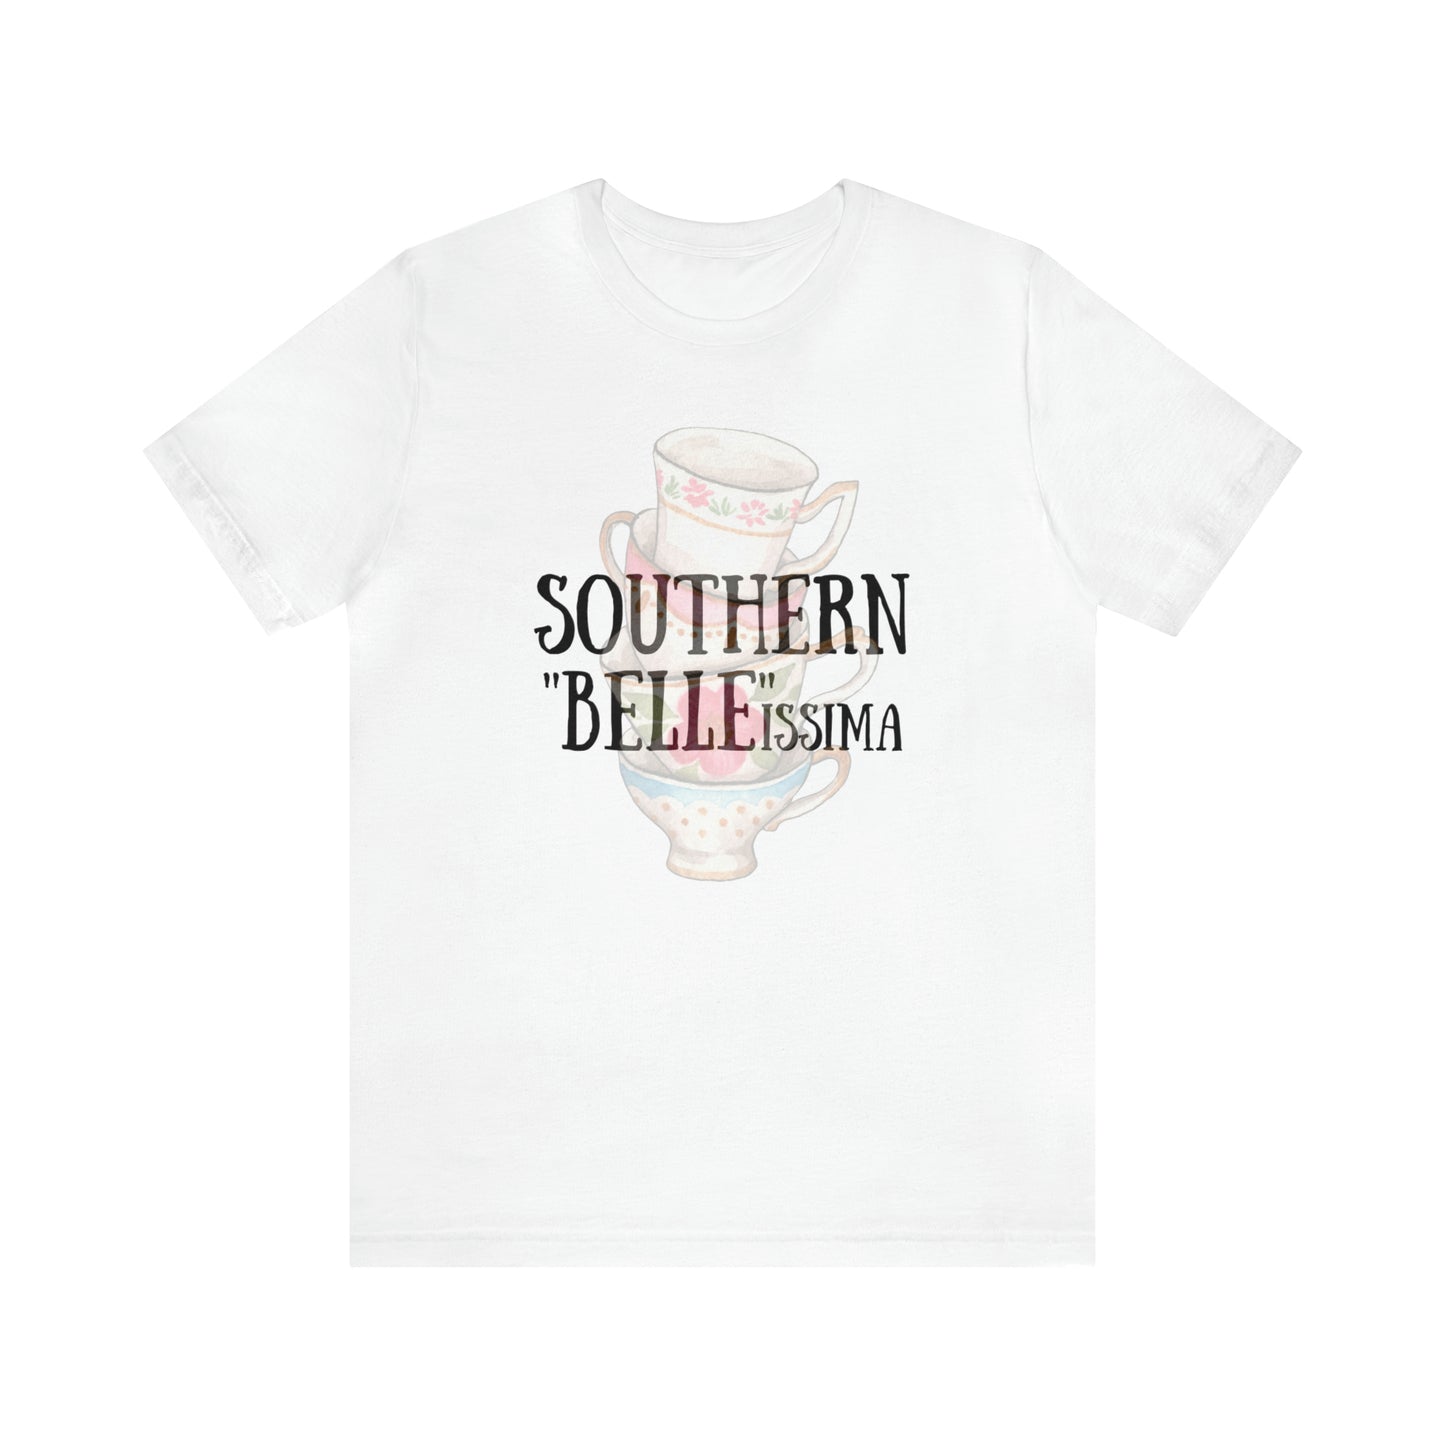 Southern "Belle"issima T-Shirt - Tea Time